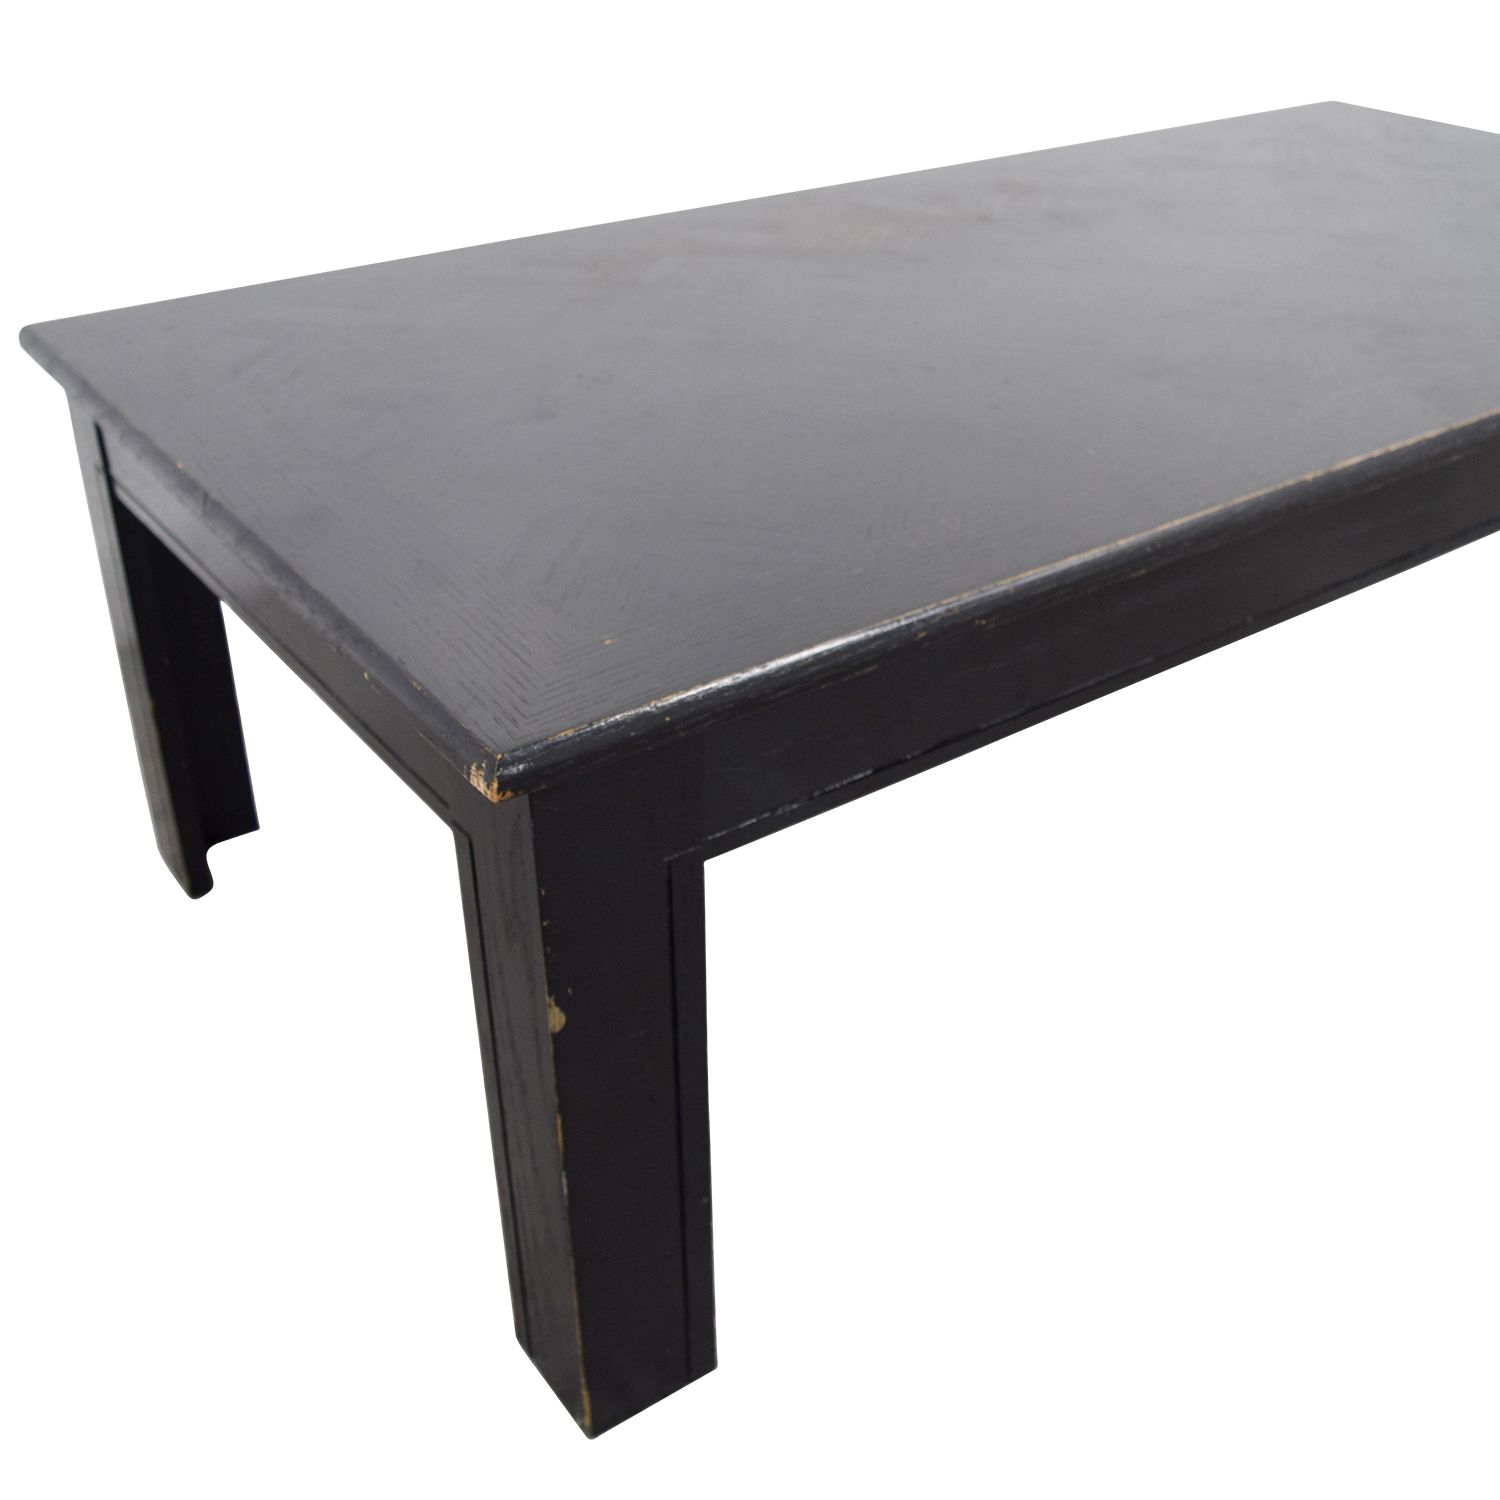 69% Off – Black Rectangular Coffee Table / Tables Intended For Black And White Coffee Tables (Photo 11 of 15)